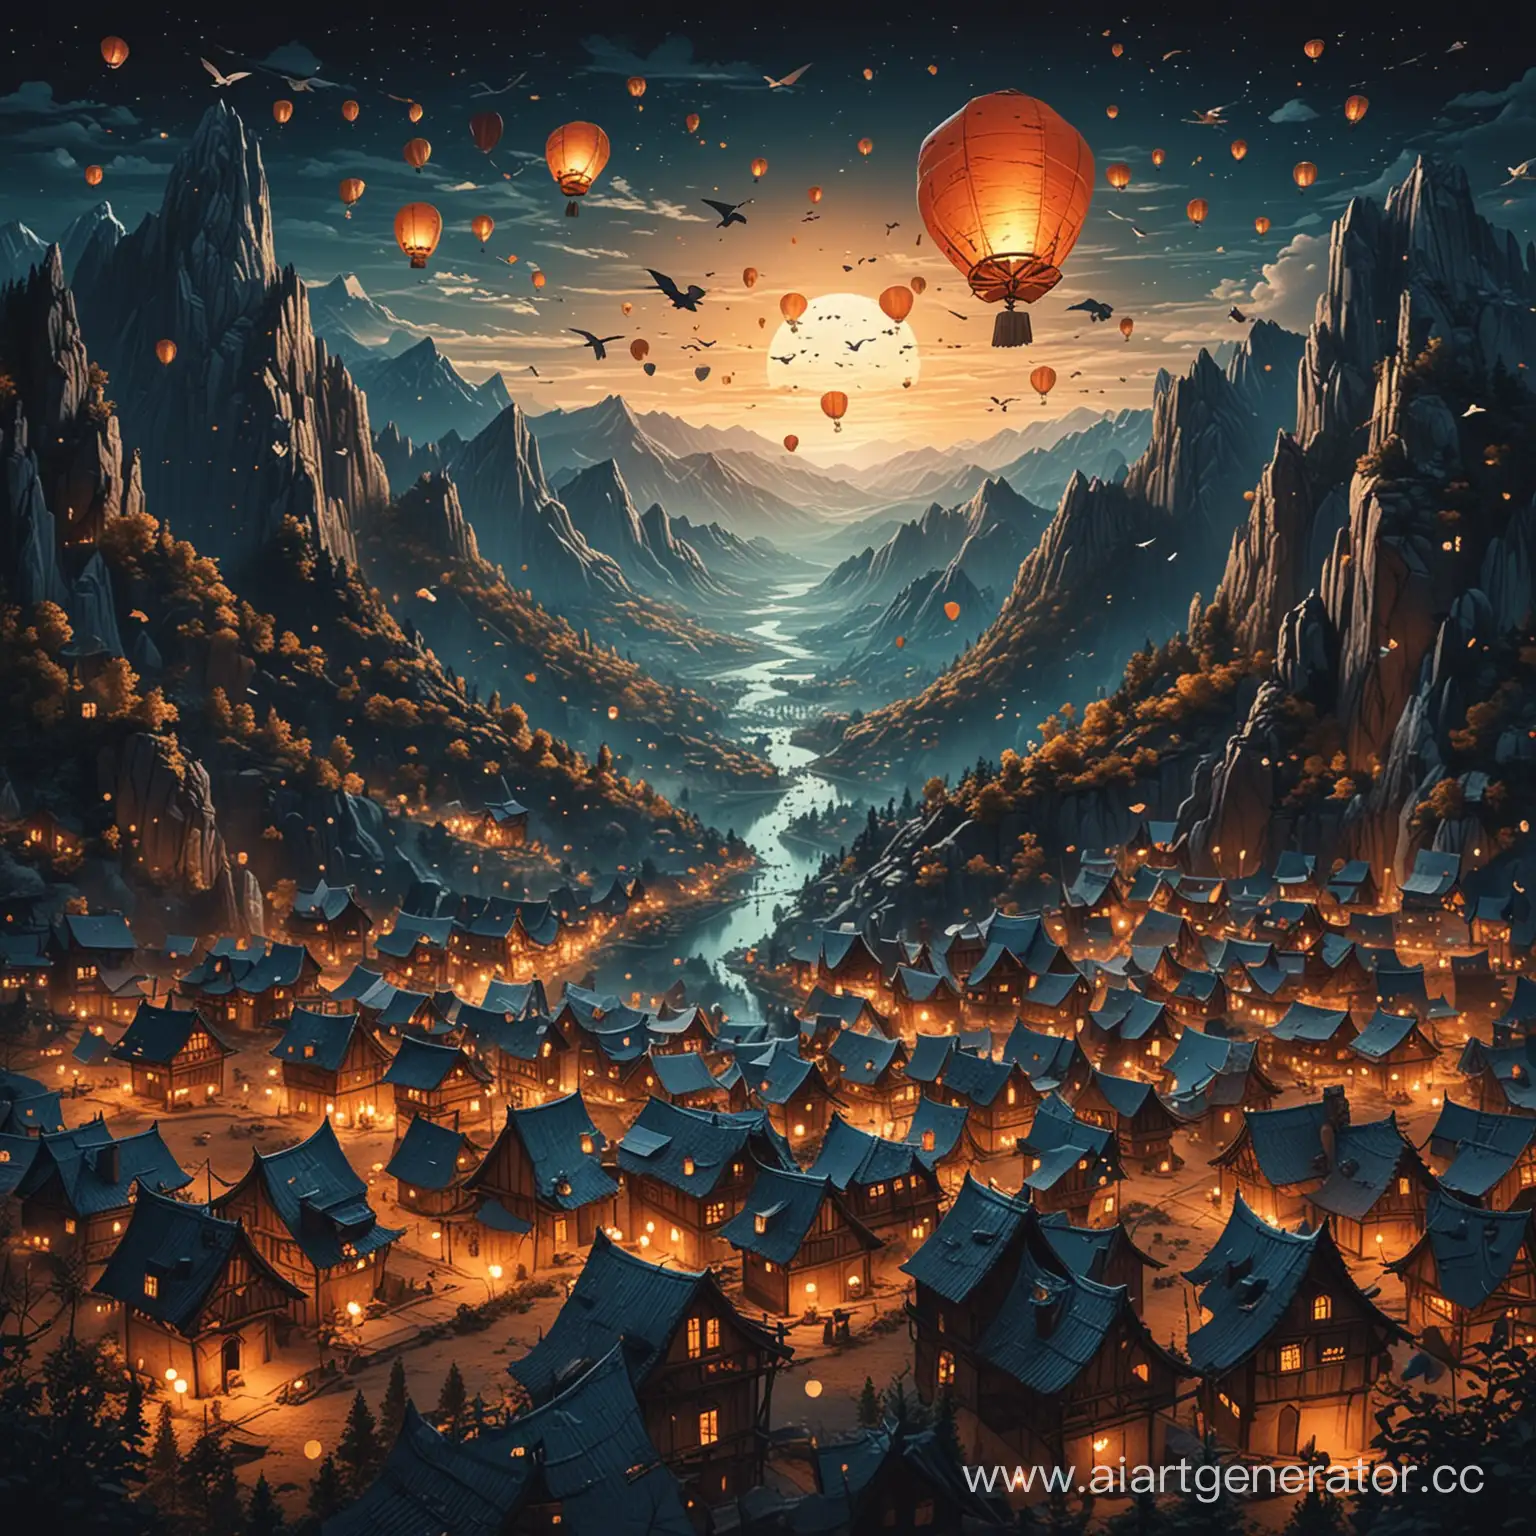 Night-Flight-over-Medieval-Settlement-and-Forests-with-Paper-Lanterns